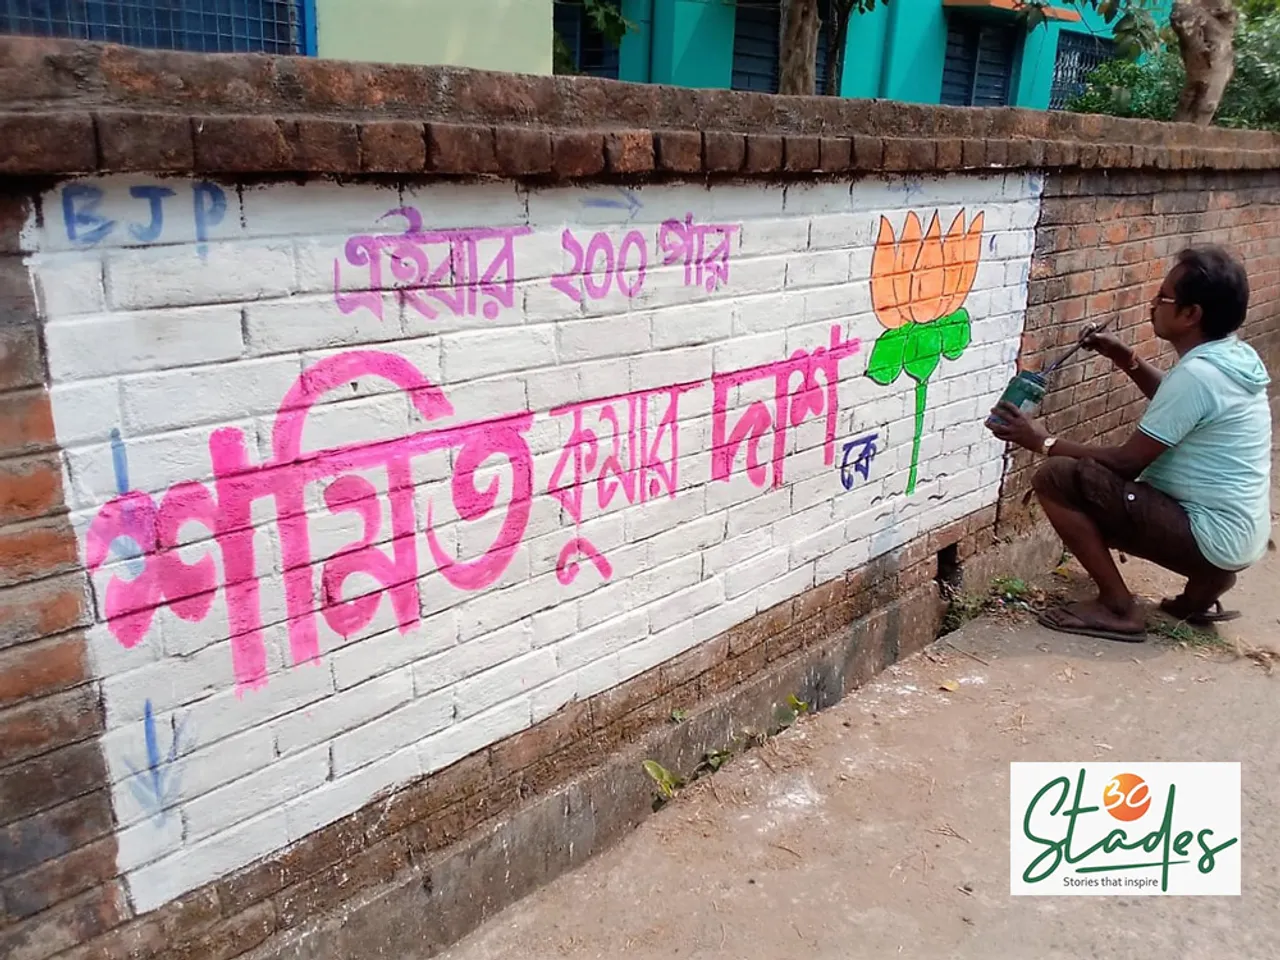 Chandan Chanda: The murder-convict drawing election graffiti for BJP & TMC in West Bengal